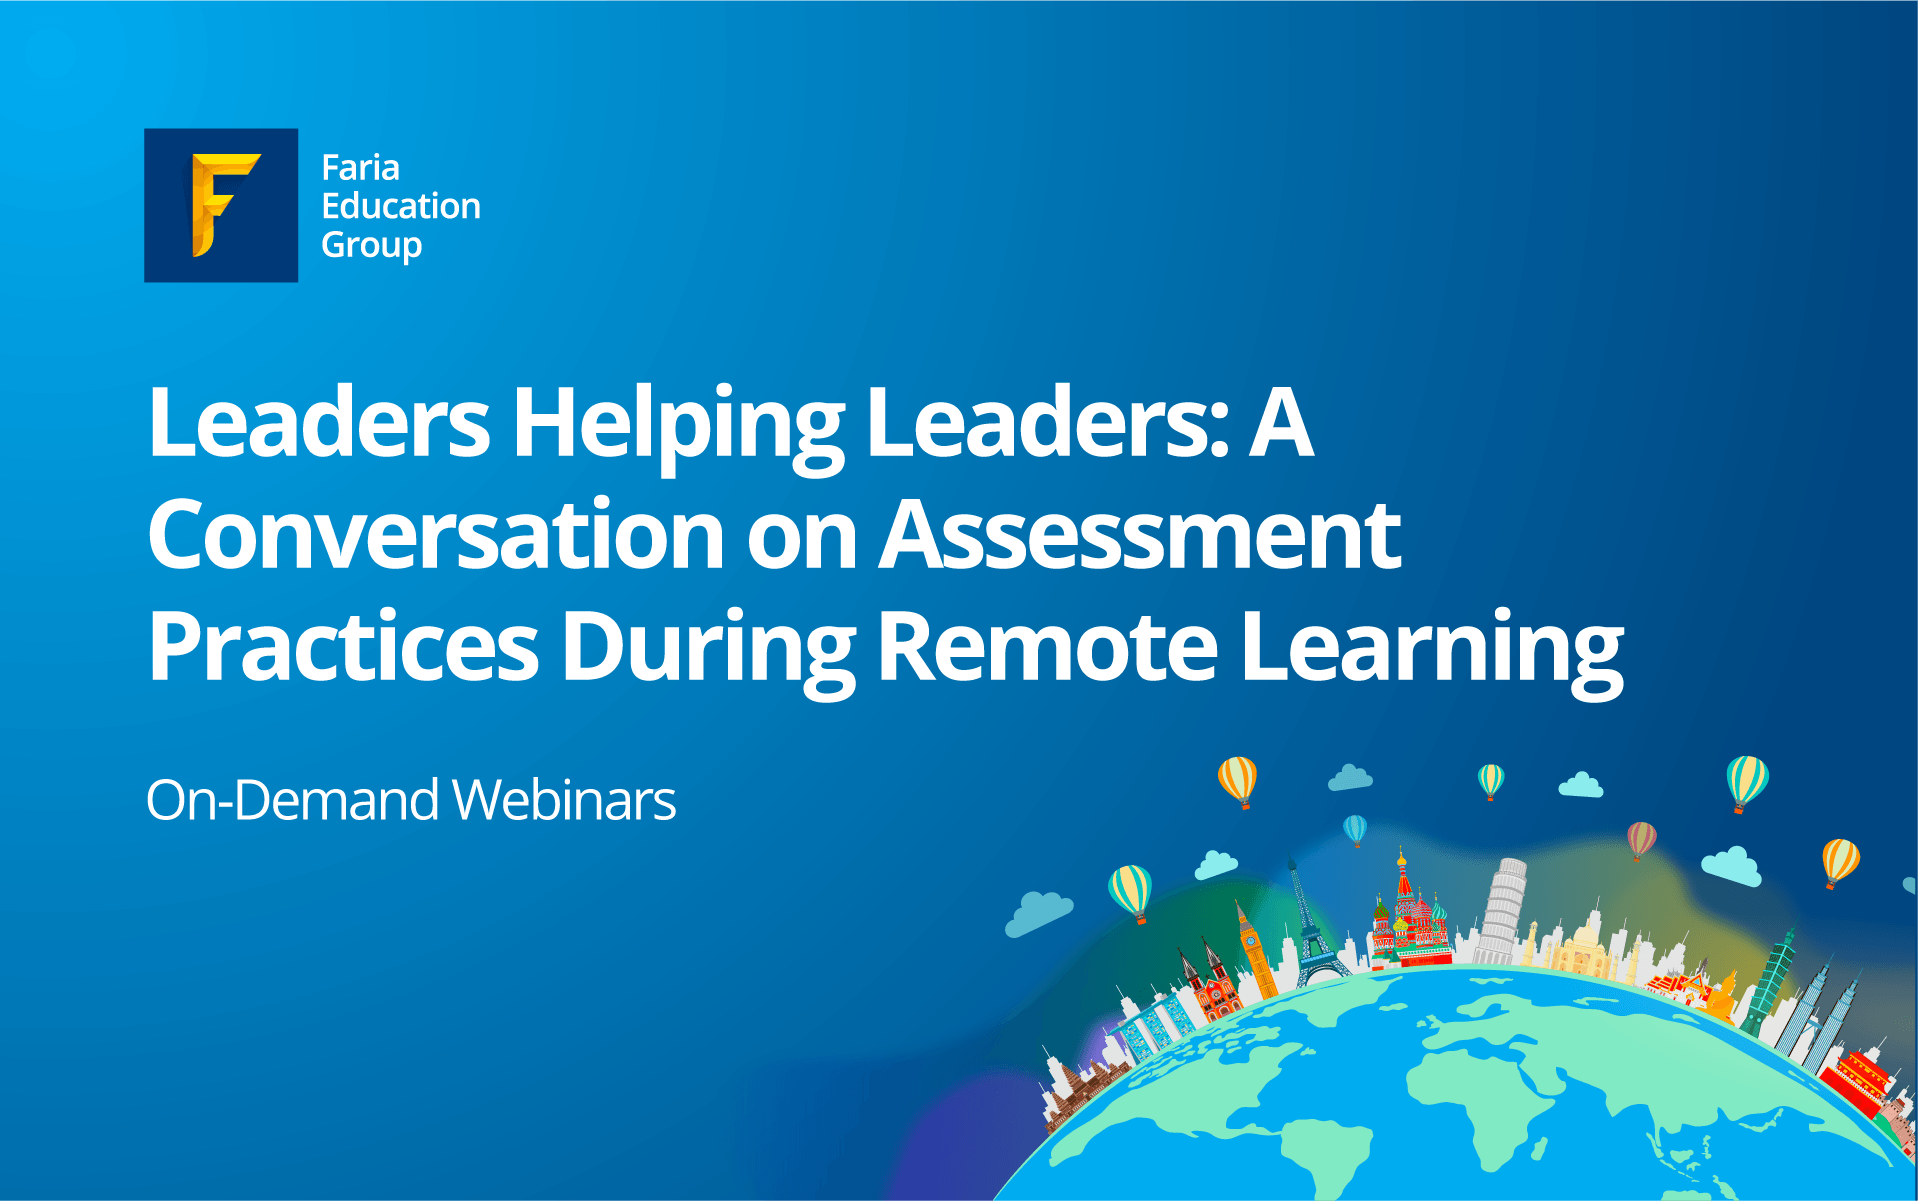 Leaders Helping Leaders: A Conversation on Supporting Differentiation in a Remote Learning Environment